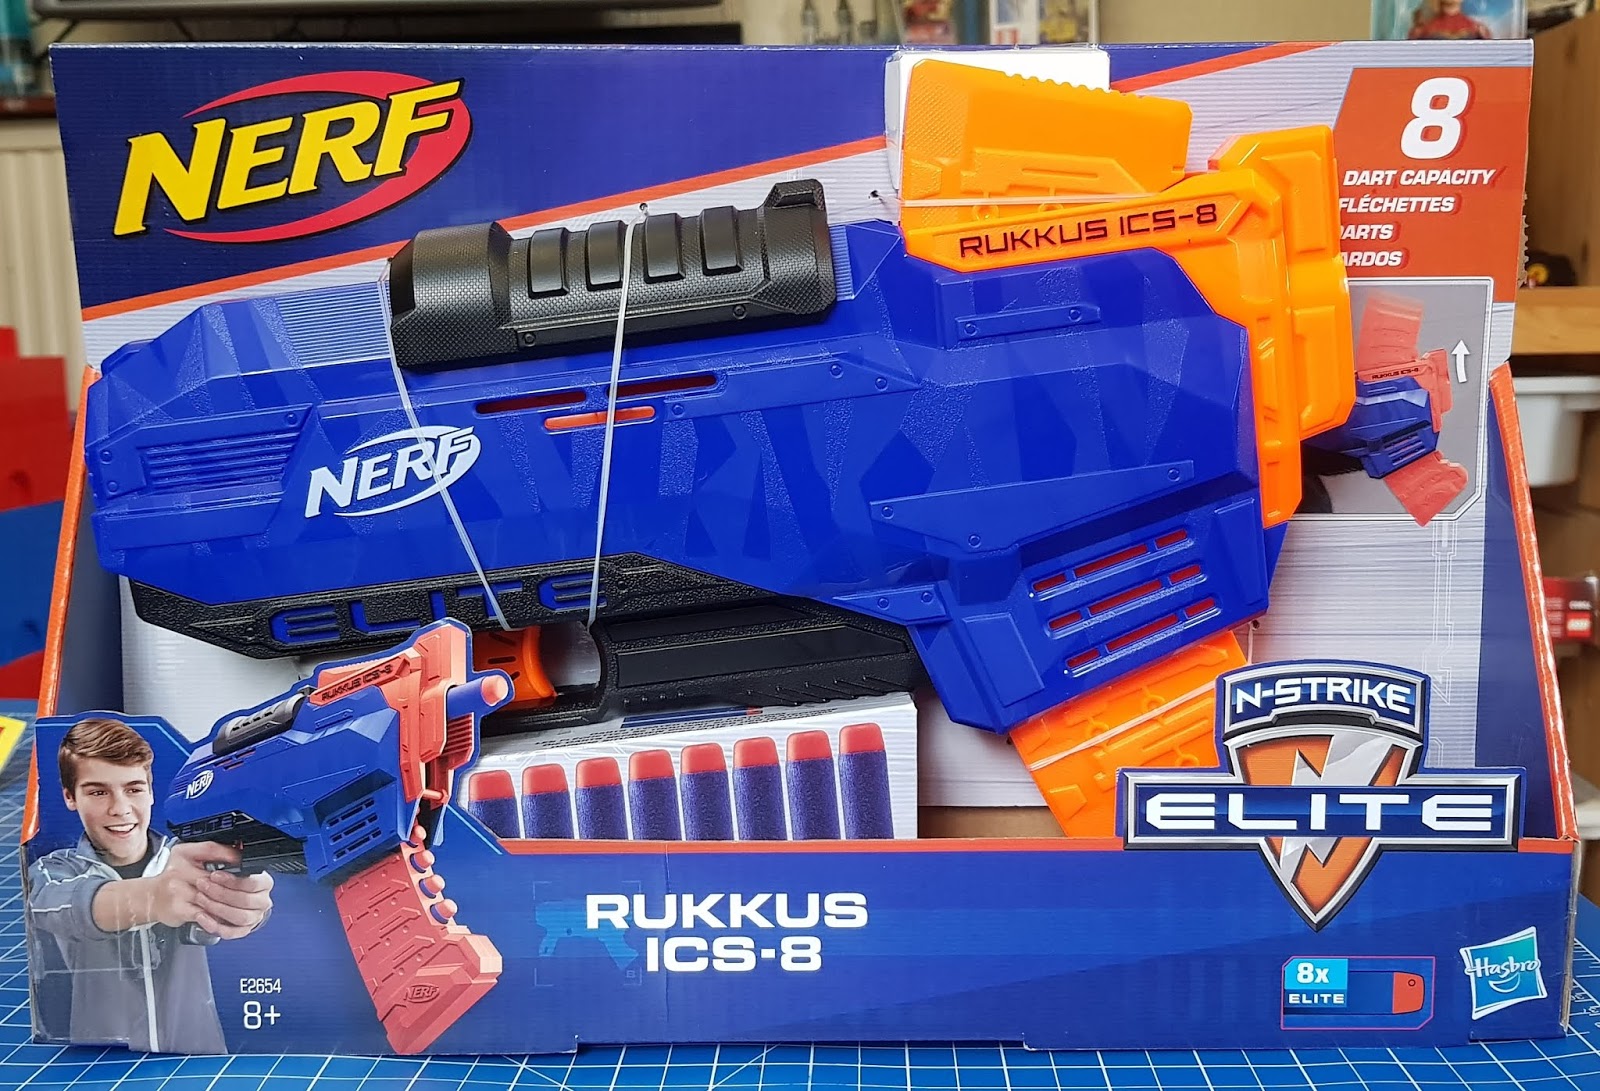 The Nerf Nerf N-Strike Elite Review (Age 8+) Sent by Hasbro